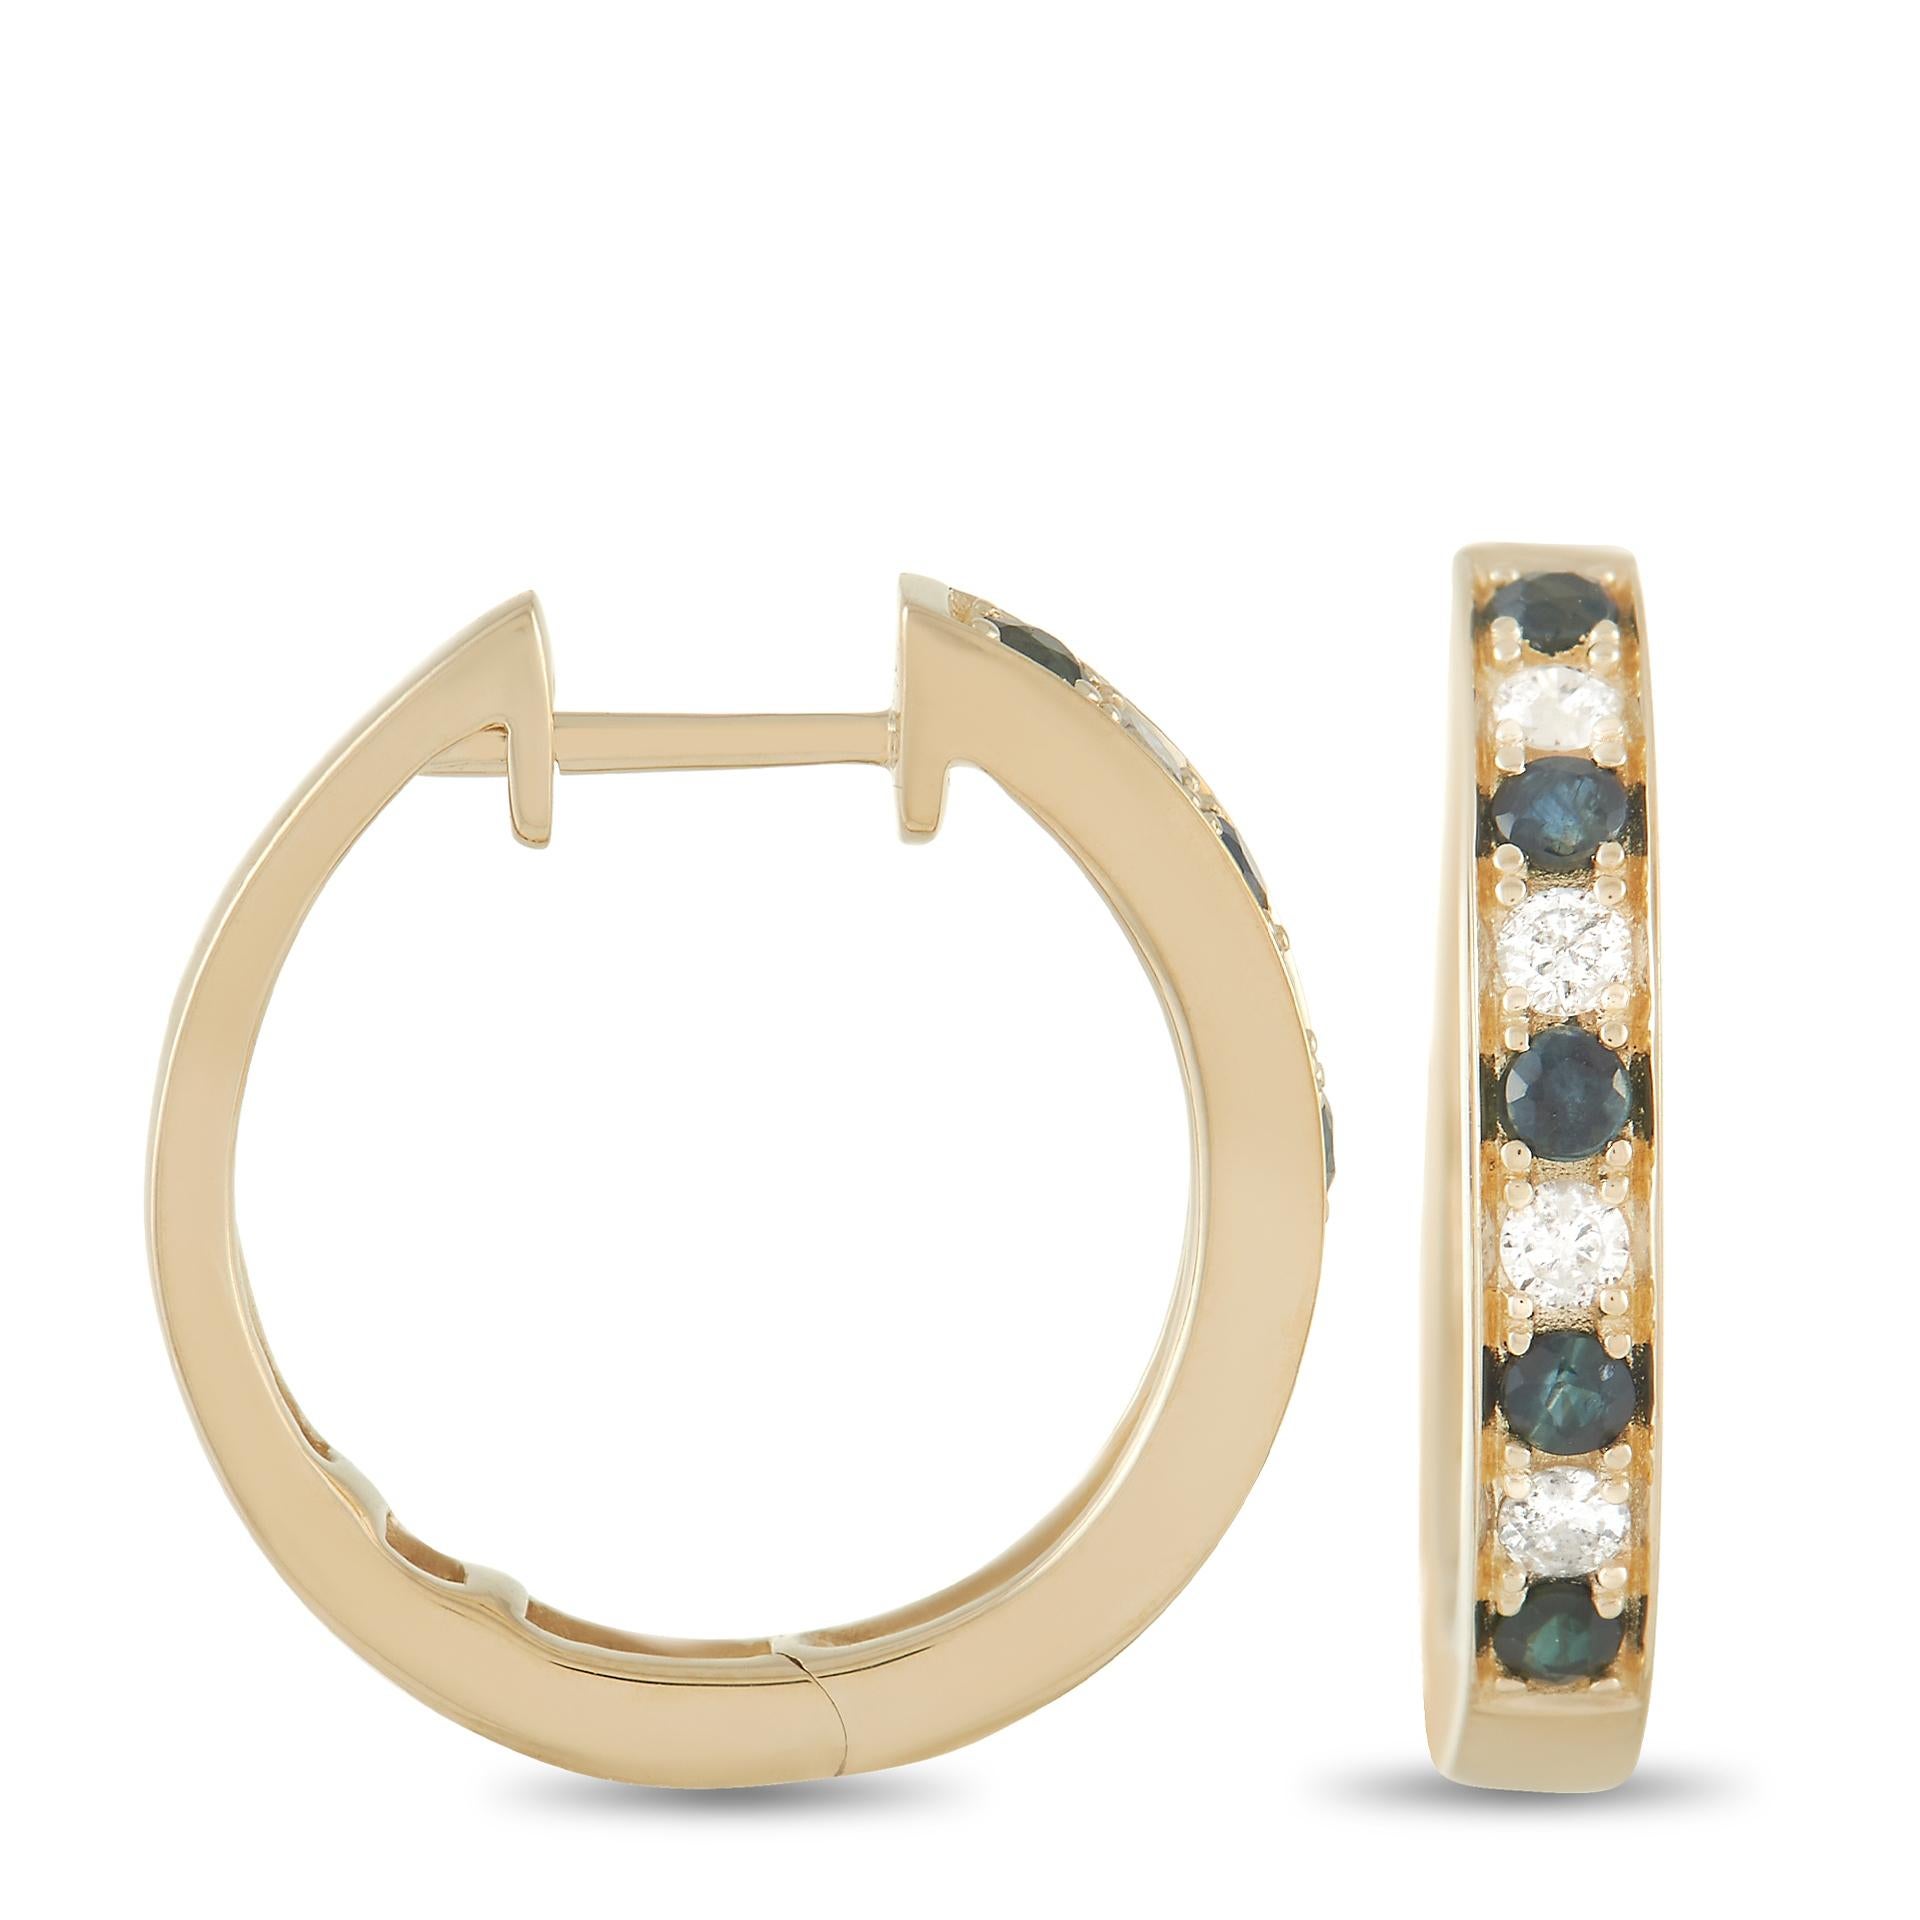 An opulent 14K Yellow Gold setting provides the perfect backdrop for shimmering gemstones on these luxurious hoop earrings. Each one measures 0.63” round and features 0.25 carats of diamonds alternating with 0.42 carats of deep blue sapphires. 
  
 